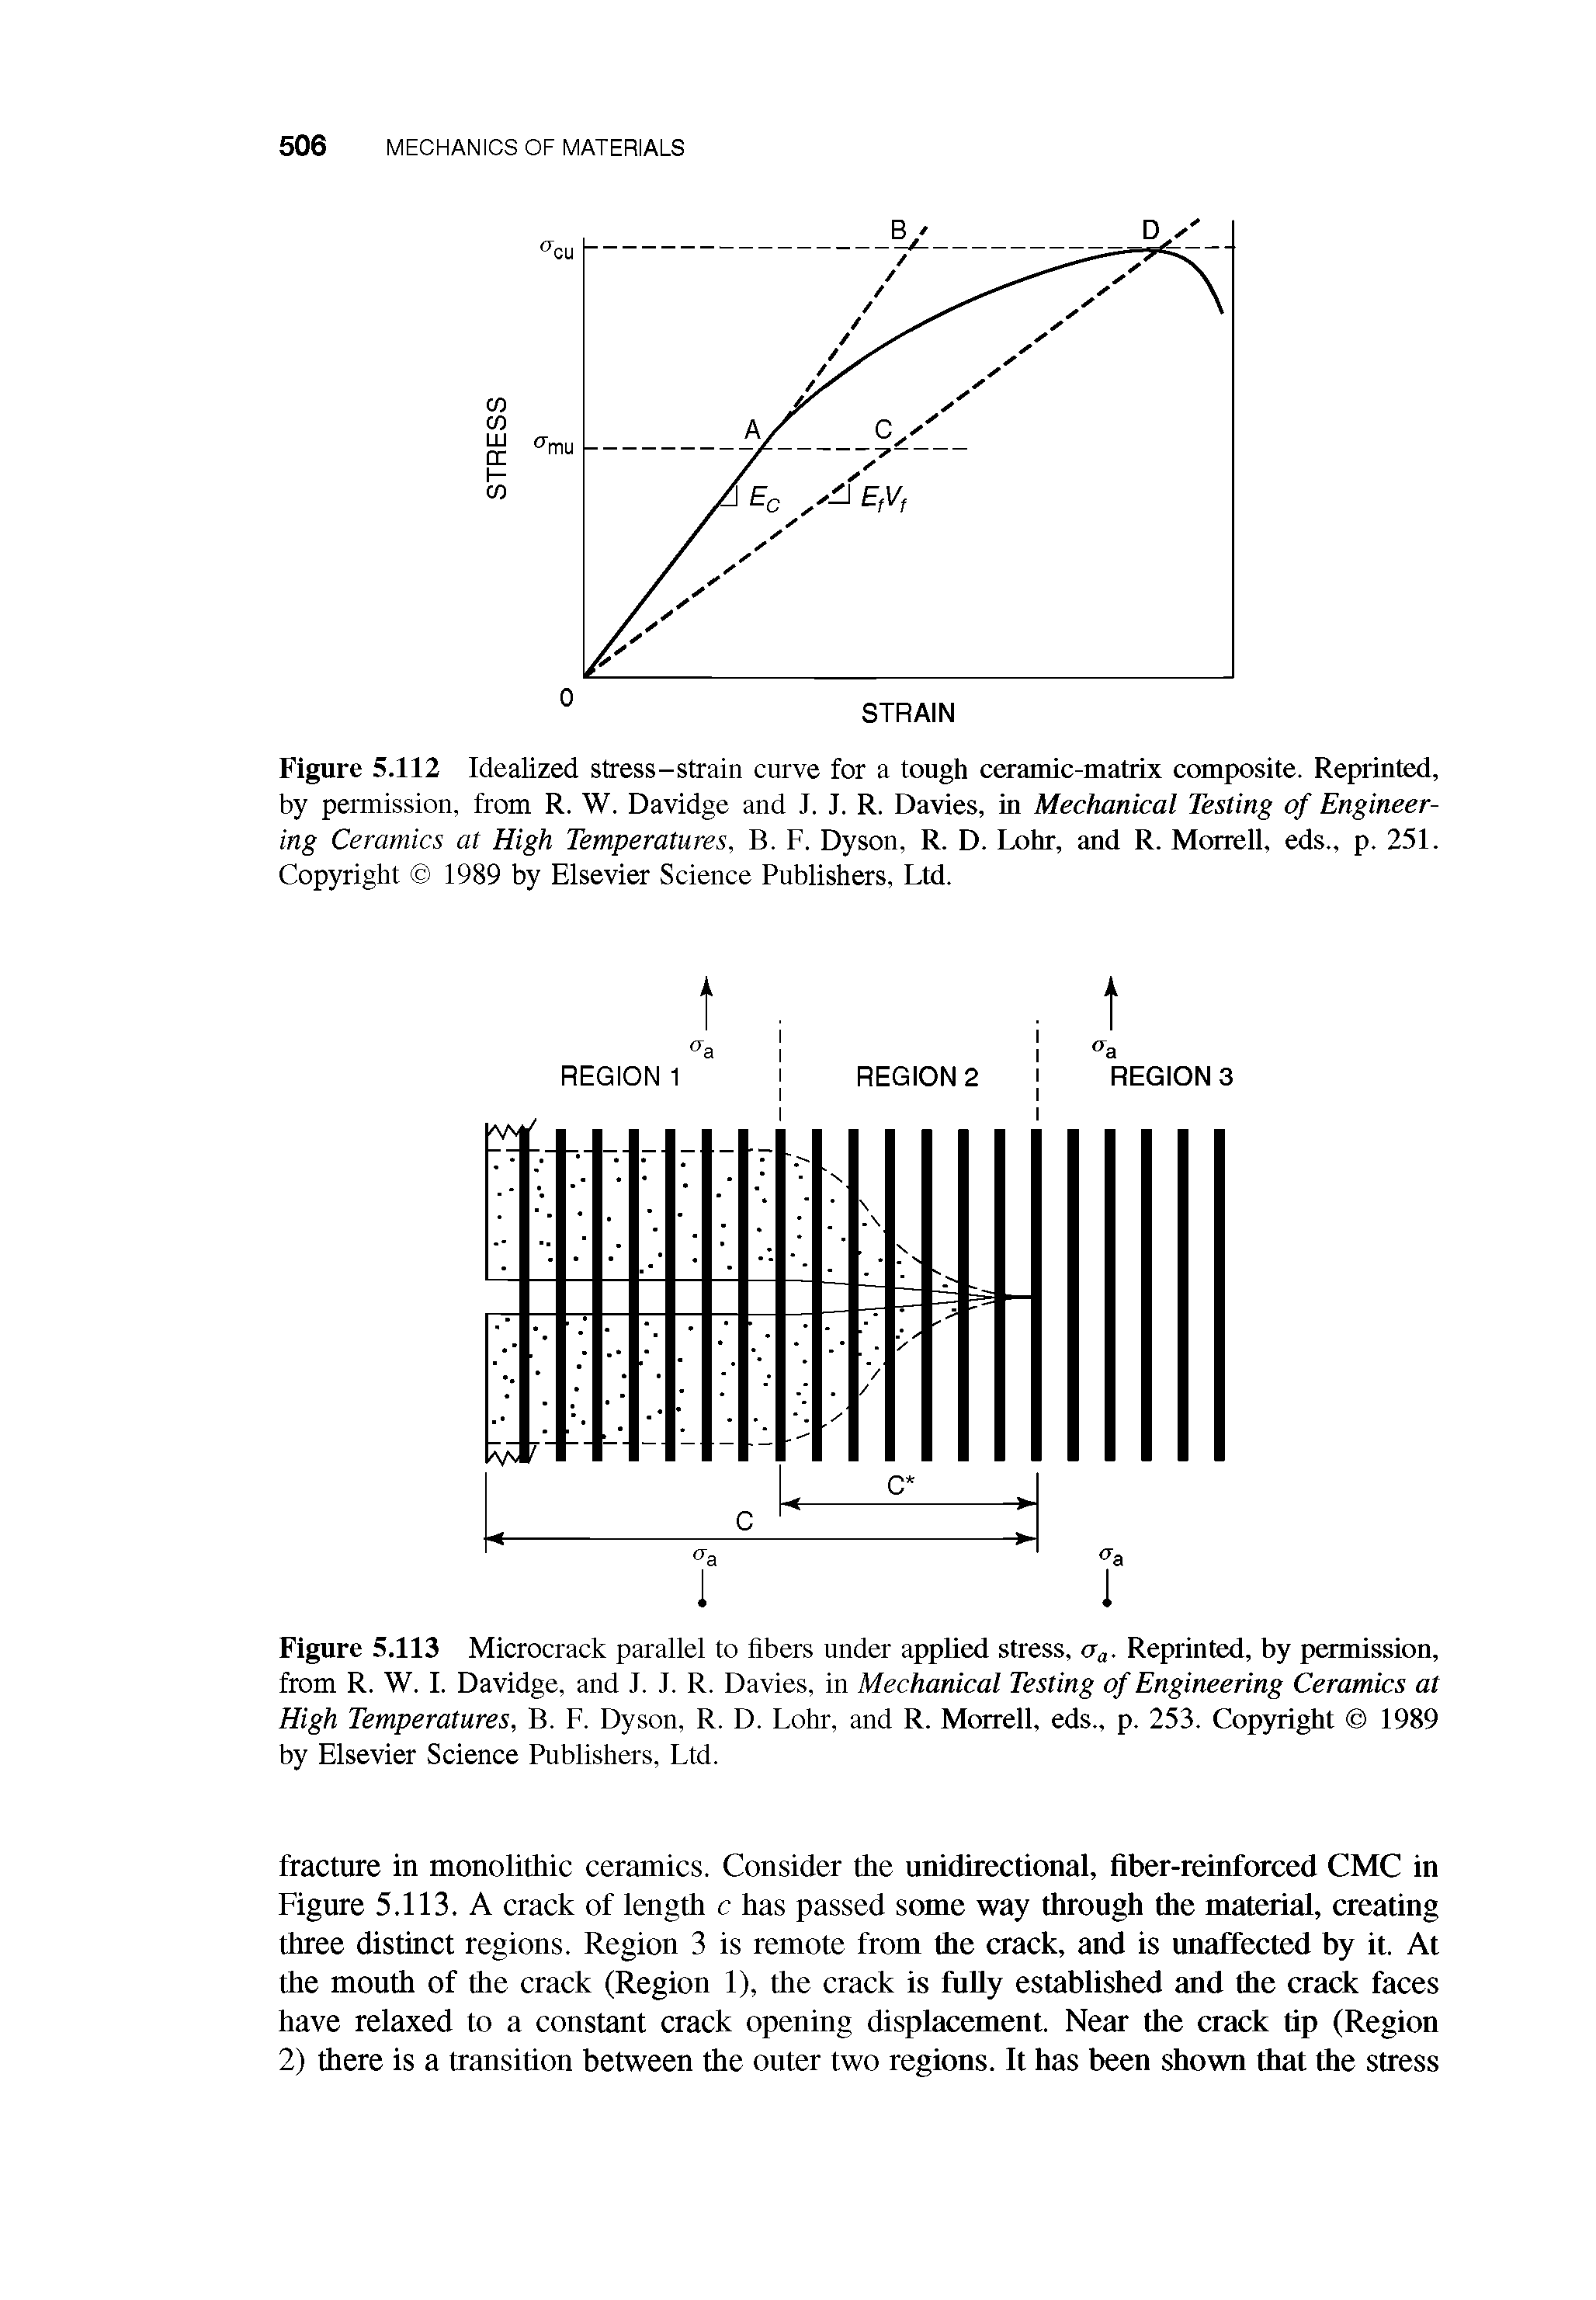 Figure 5.113 Microcrack parallel to fibers under applied stress, Oa- Reprinted, by permission, from R. W. I. Davidge, and 1. 1. R. Davies, in Mechanical Testing of Engineering Ceramics at High Temperatures, B. F. Dyson, R. D. Lohr, and R. Morrell, eds., p. 253. Copyright 1989 by Elsevier Science Publishers, Ltd.